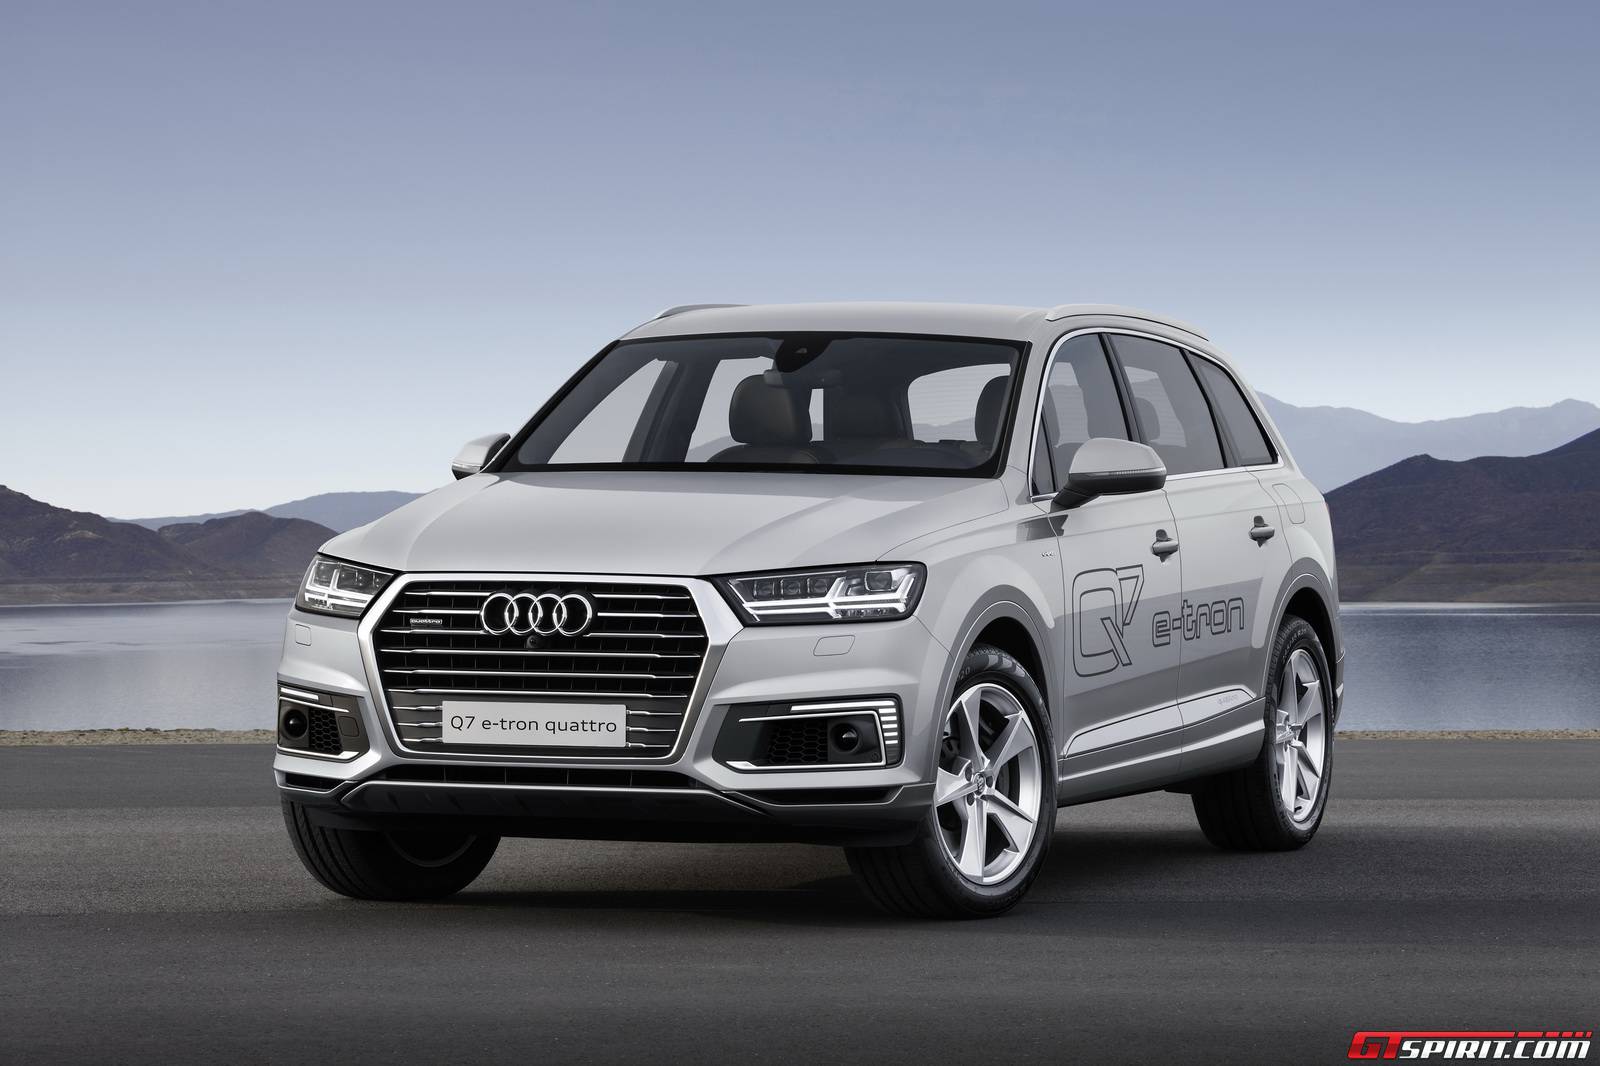 After the unveiling of the Audi Q7 e-tron diesel at the Geneva Motor ...